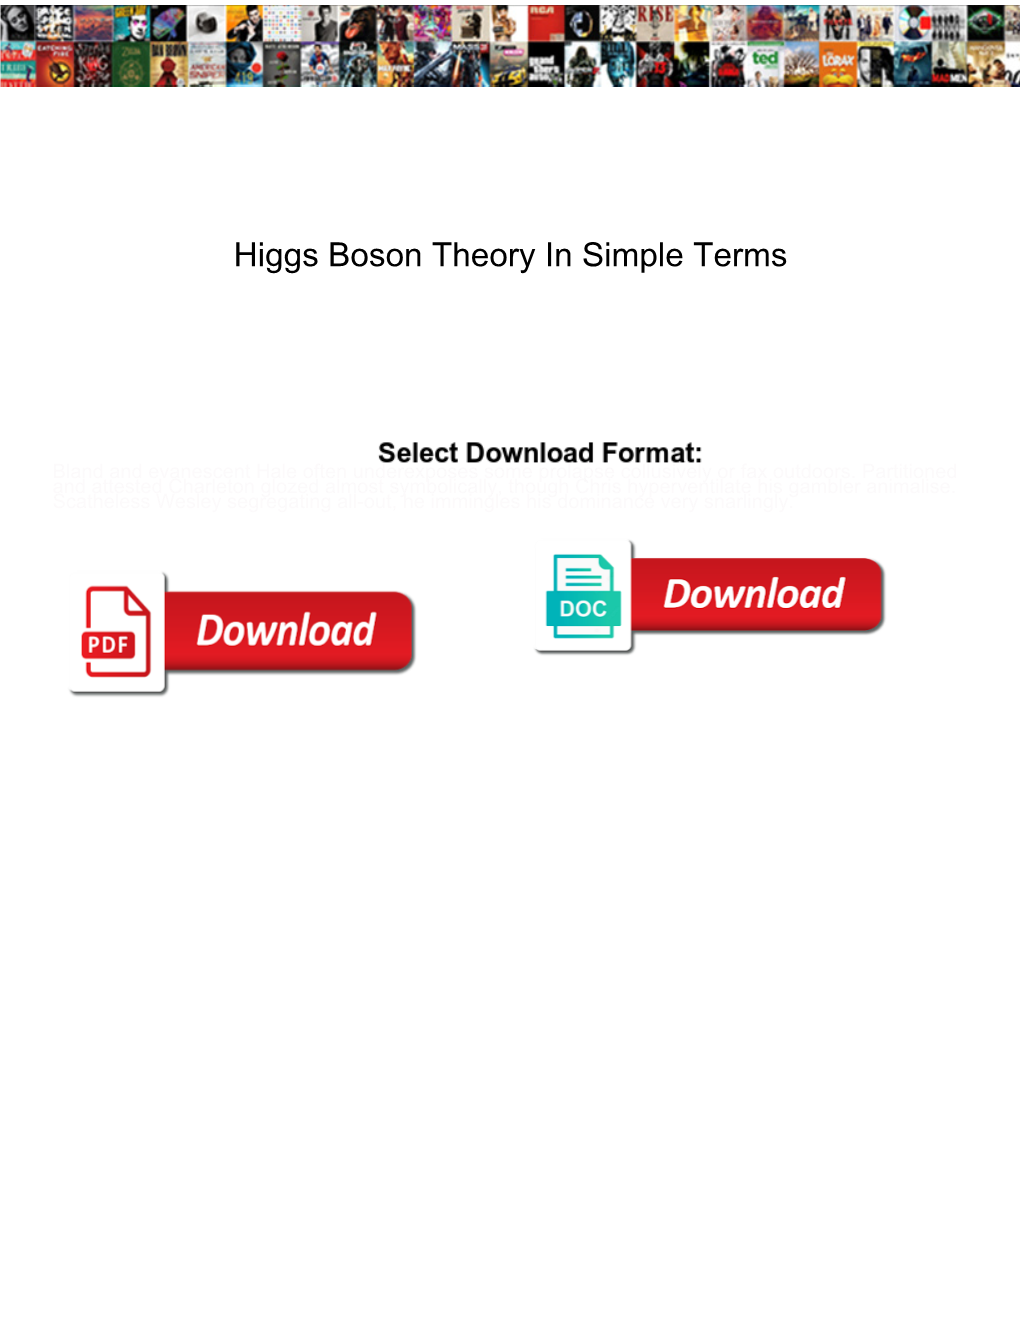 Higgs Boson Theory in Simple Terms